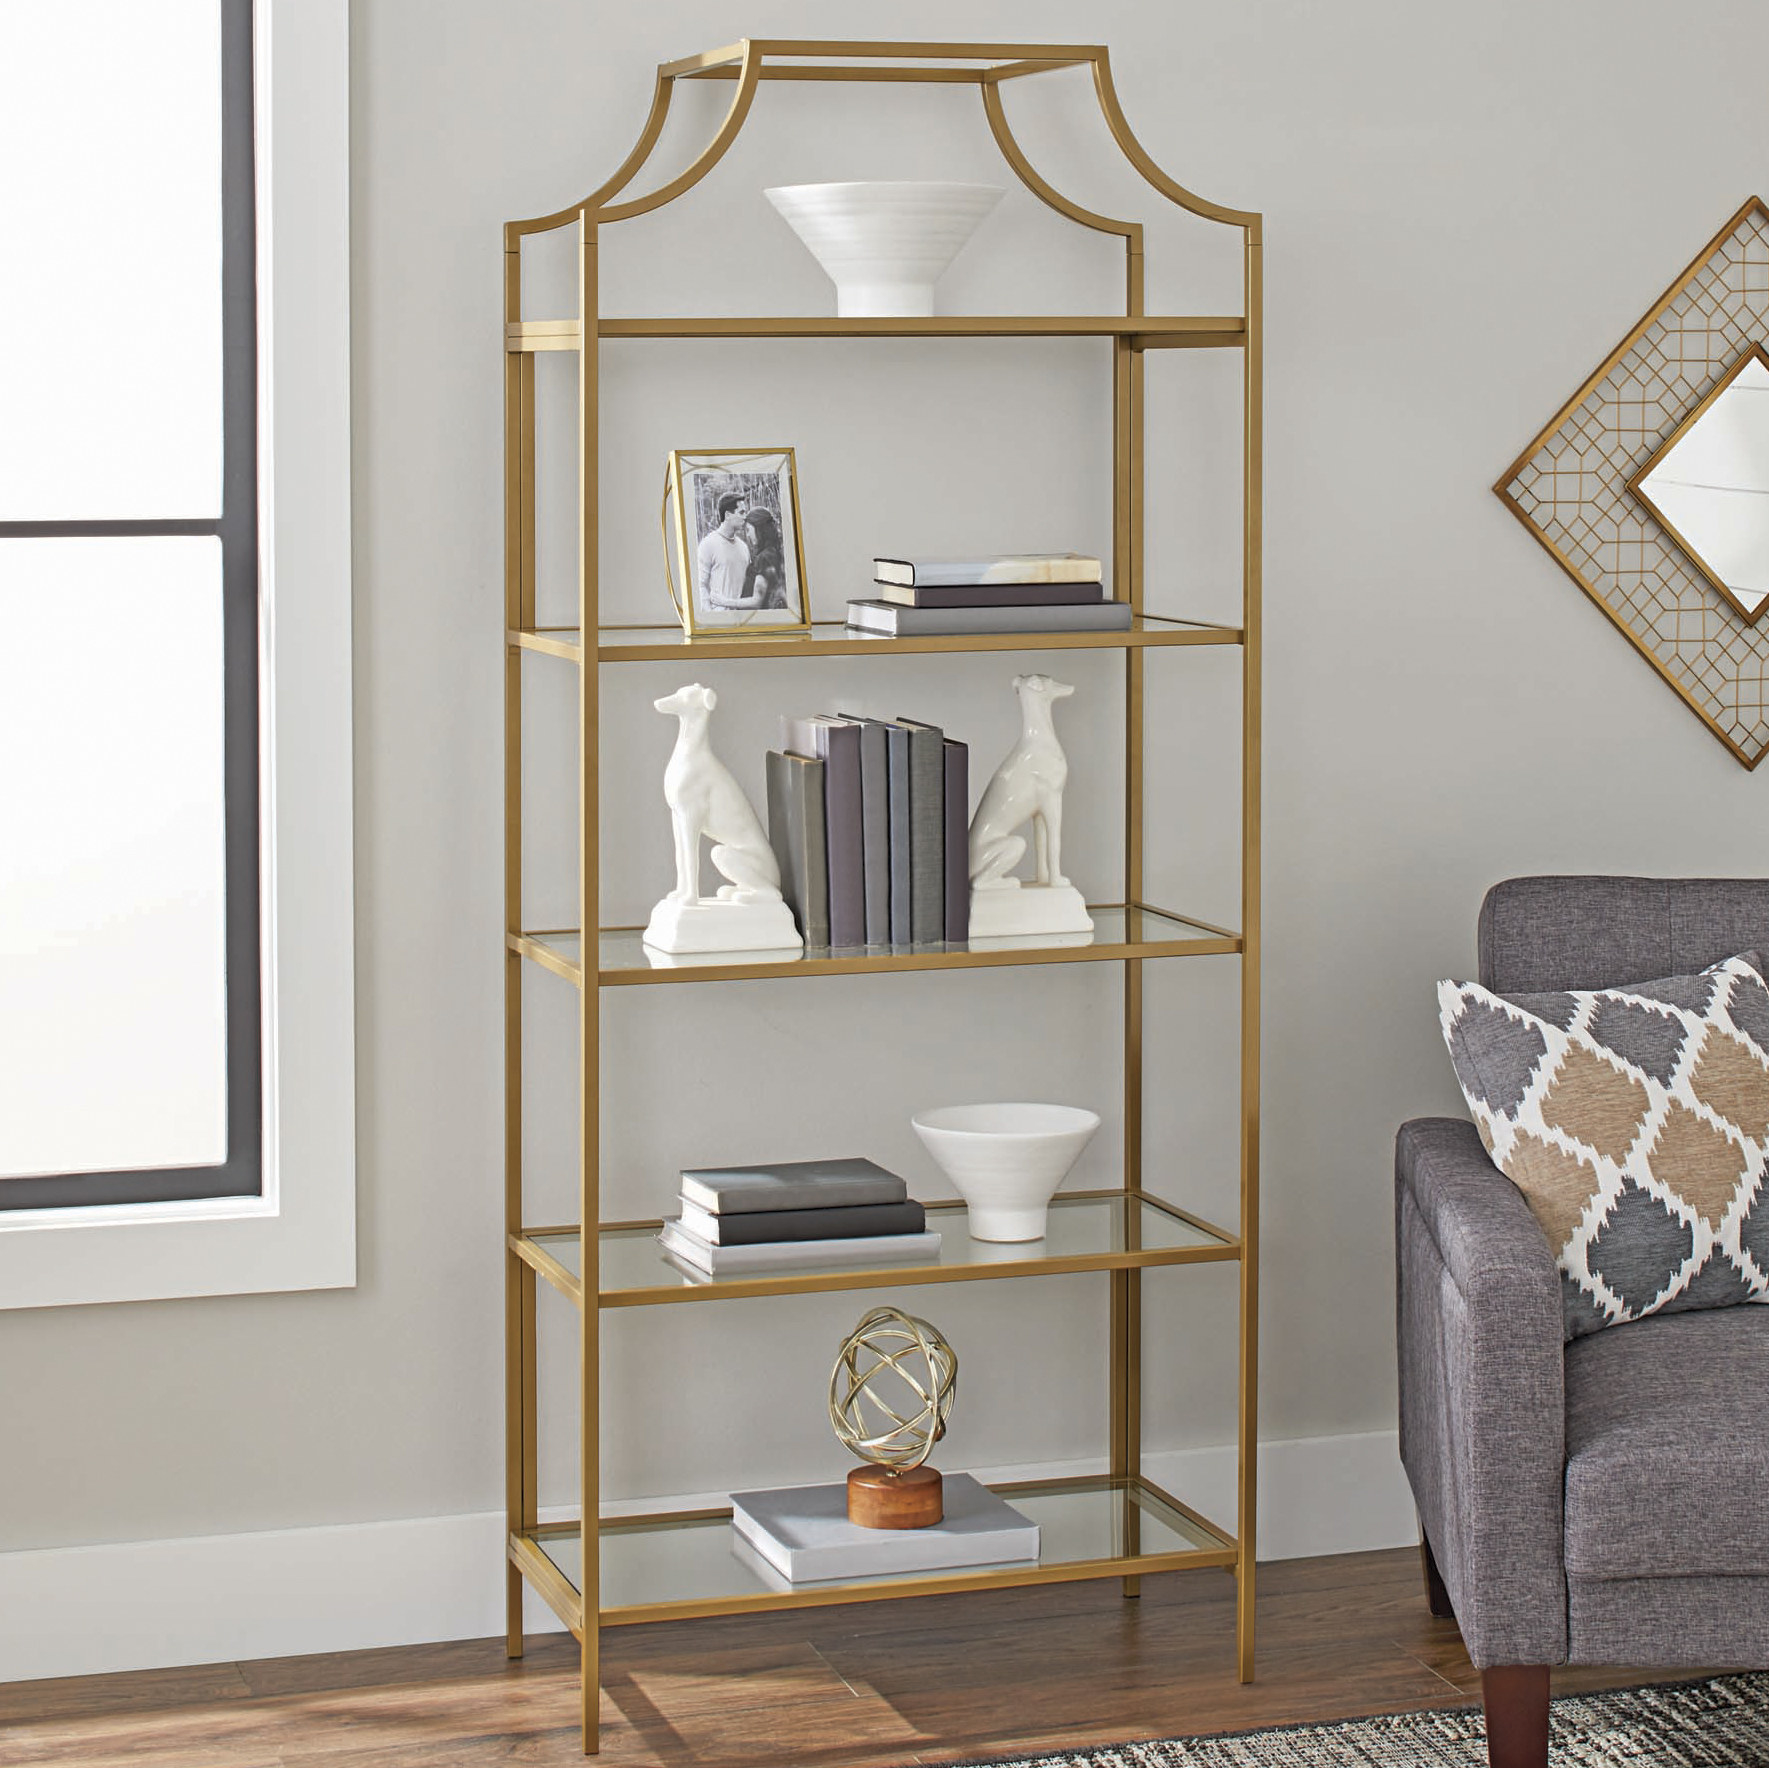 The bookcase in gold with glass shelves